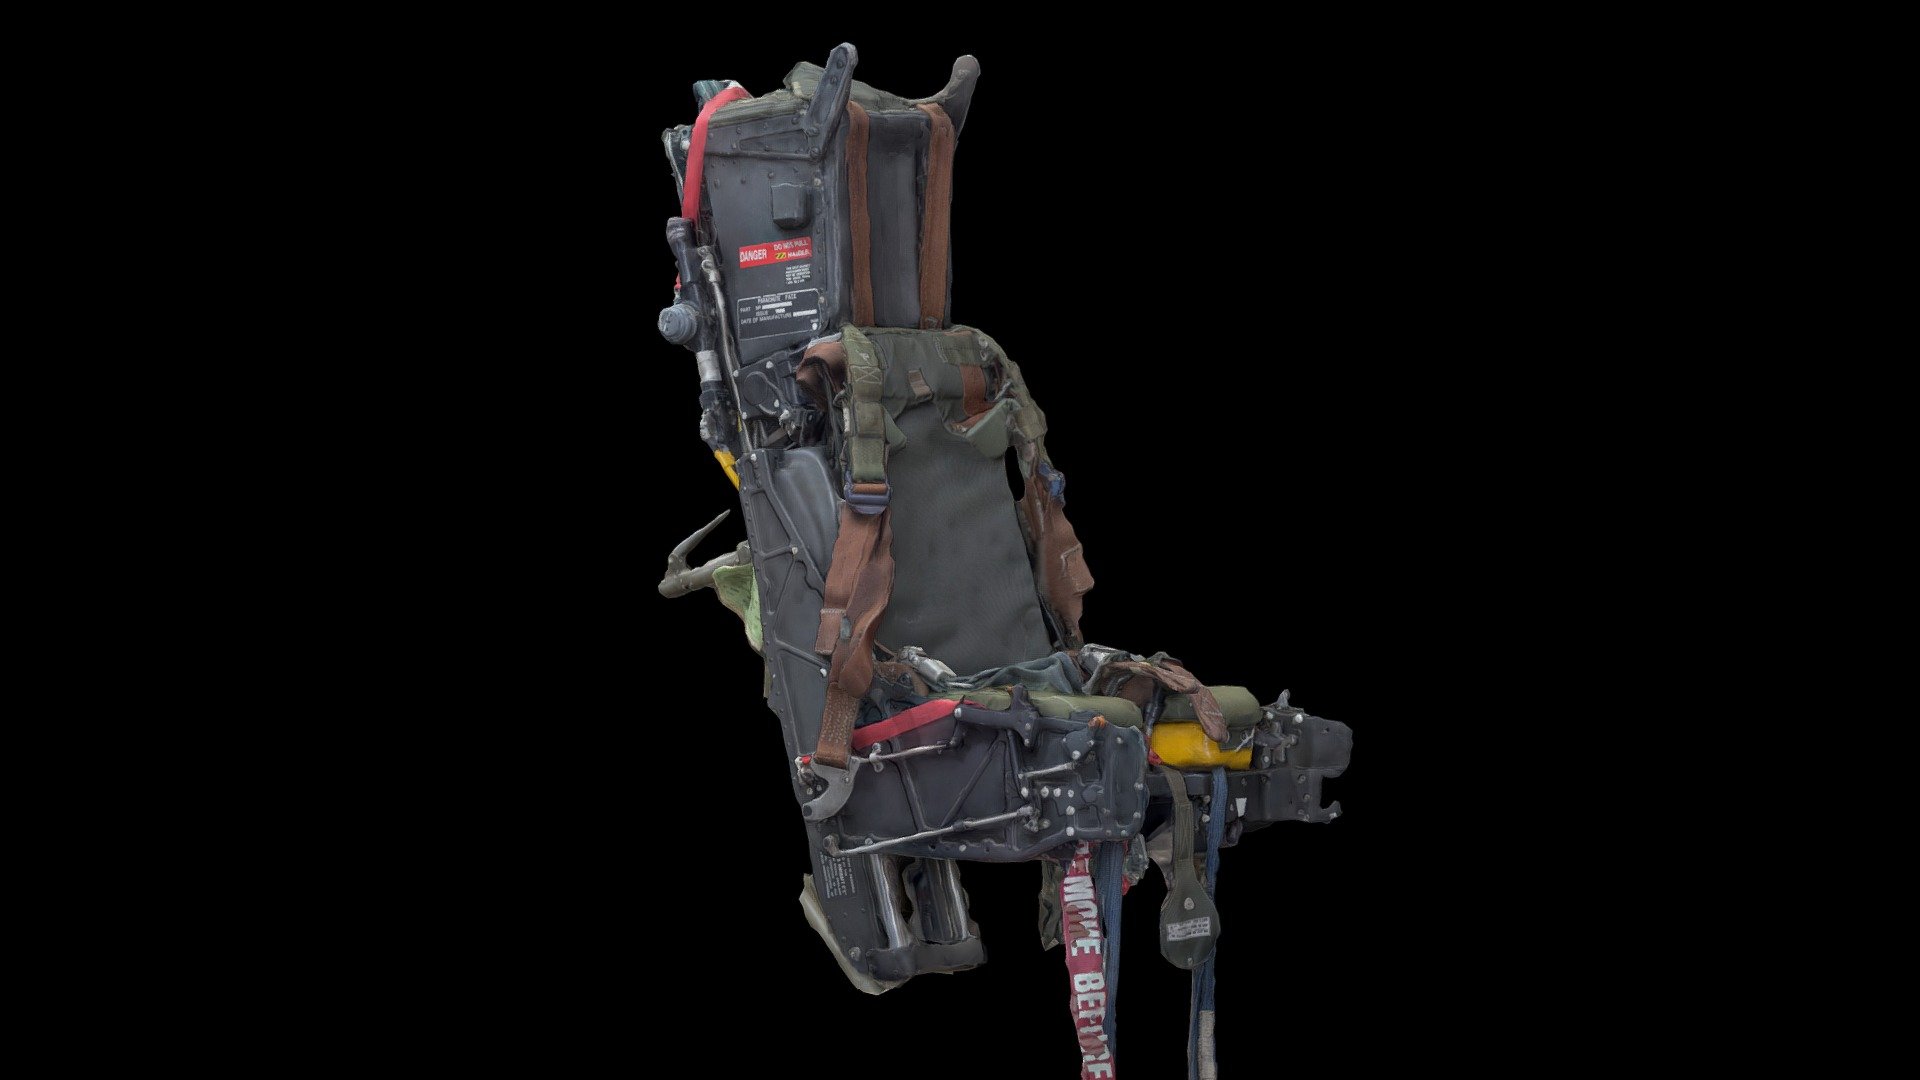 A quick and dirty scan with polycam of a planes ejector seat from a Jet

Cleaned up a bit using blender. 

Scanned at the technology museum in Milan.

https://twitter.com/home
https://www.instagram.com/austinbeaulier/ - Jet Plane Cockpit Ejector Seat Scan - Buy Royalty Free 3D model by Austin Beaulier (@Austin.Beaulier) 3d model